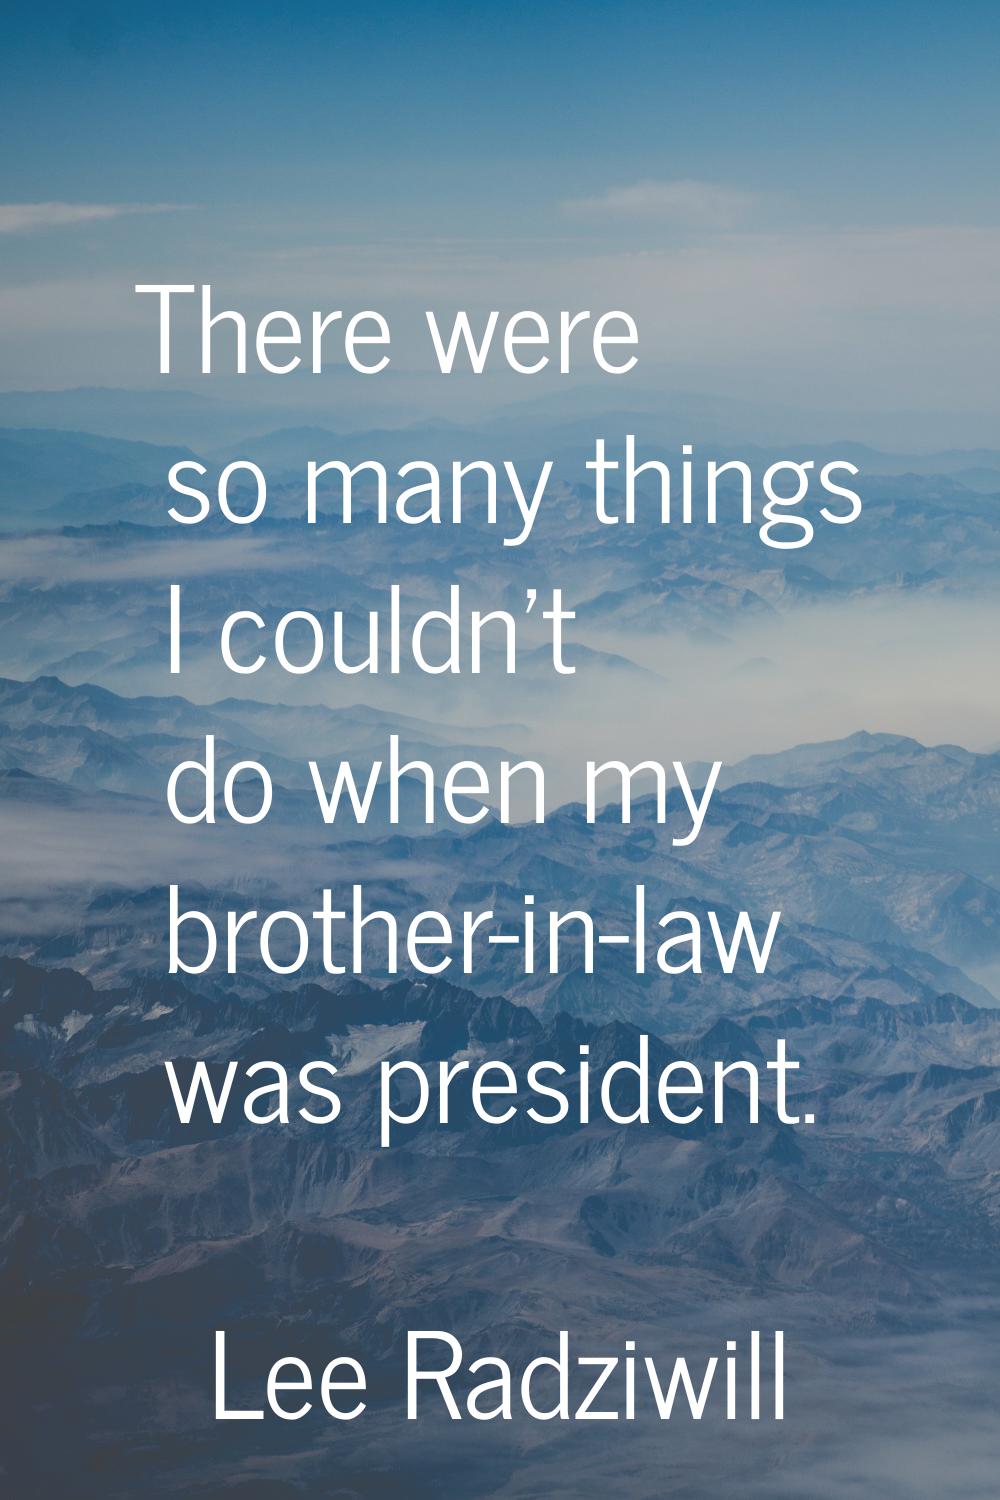 There were so many things I couldn't do when my brother-in-law was president.